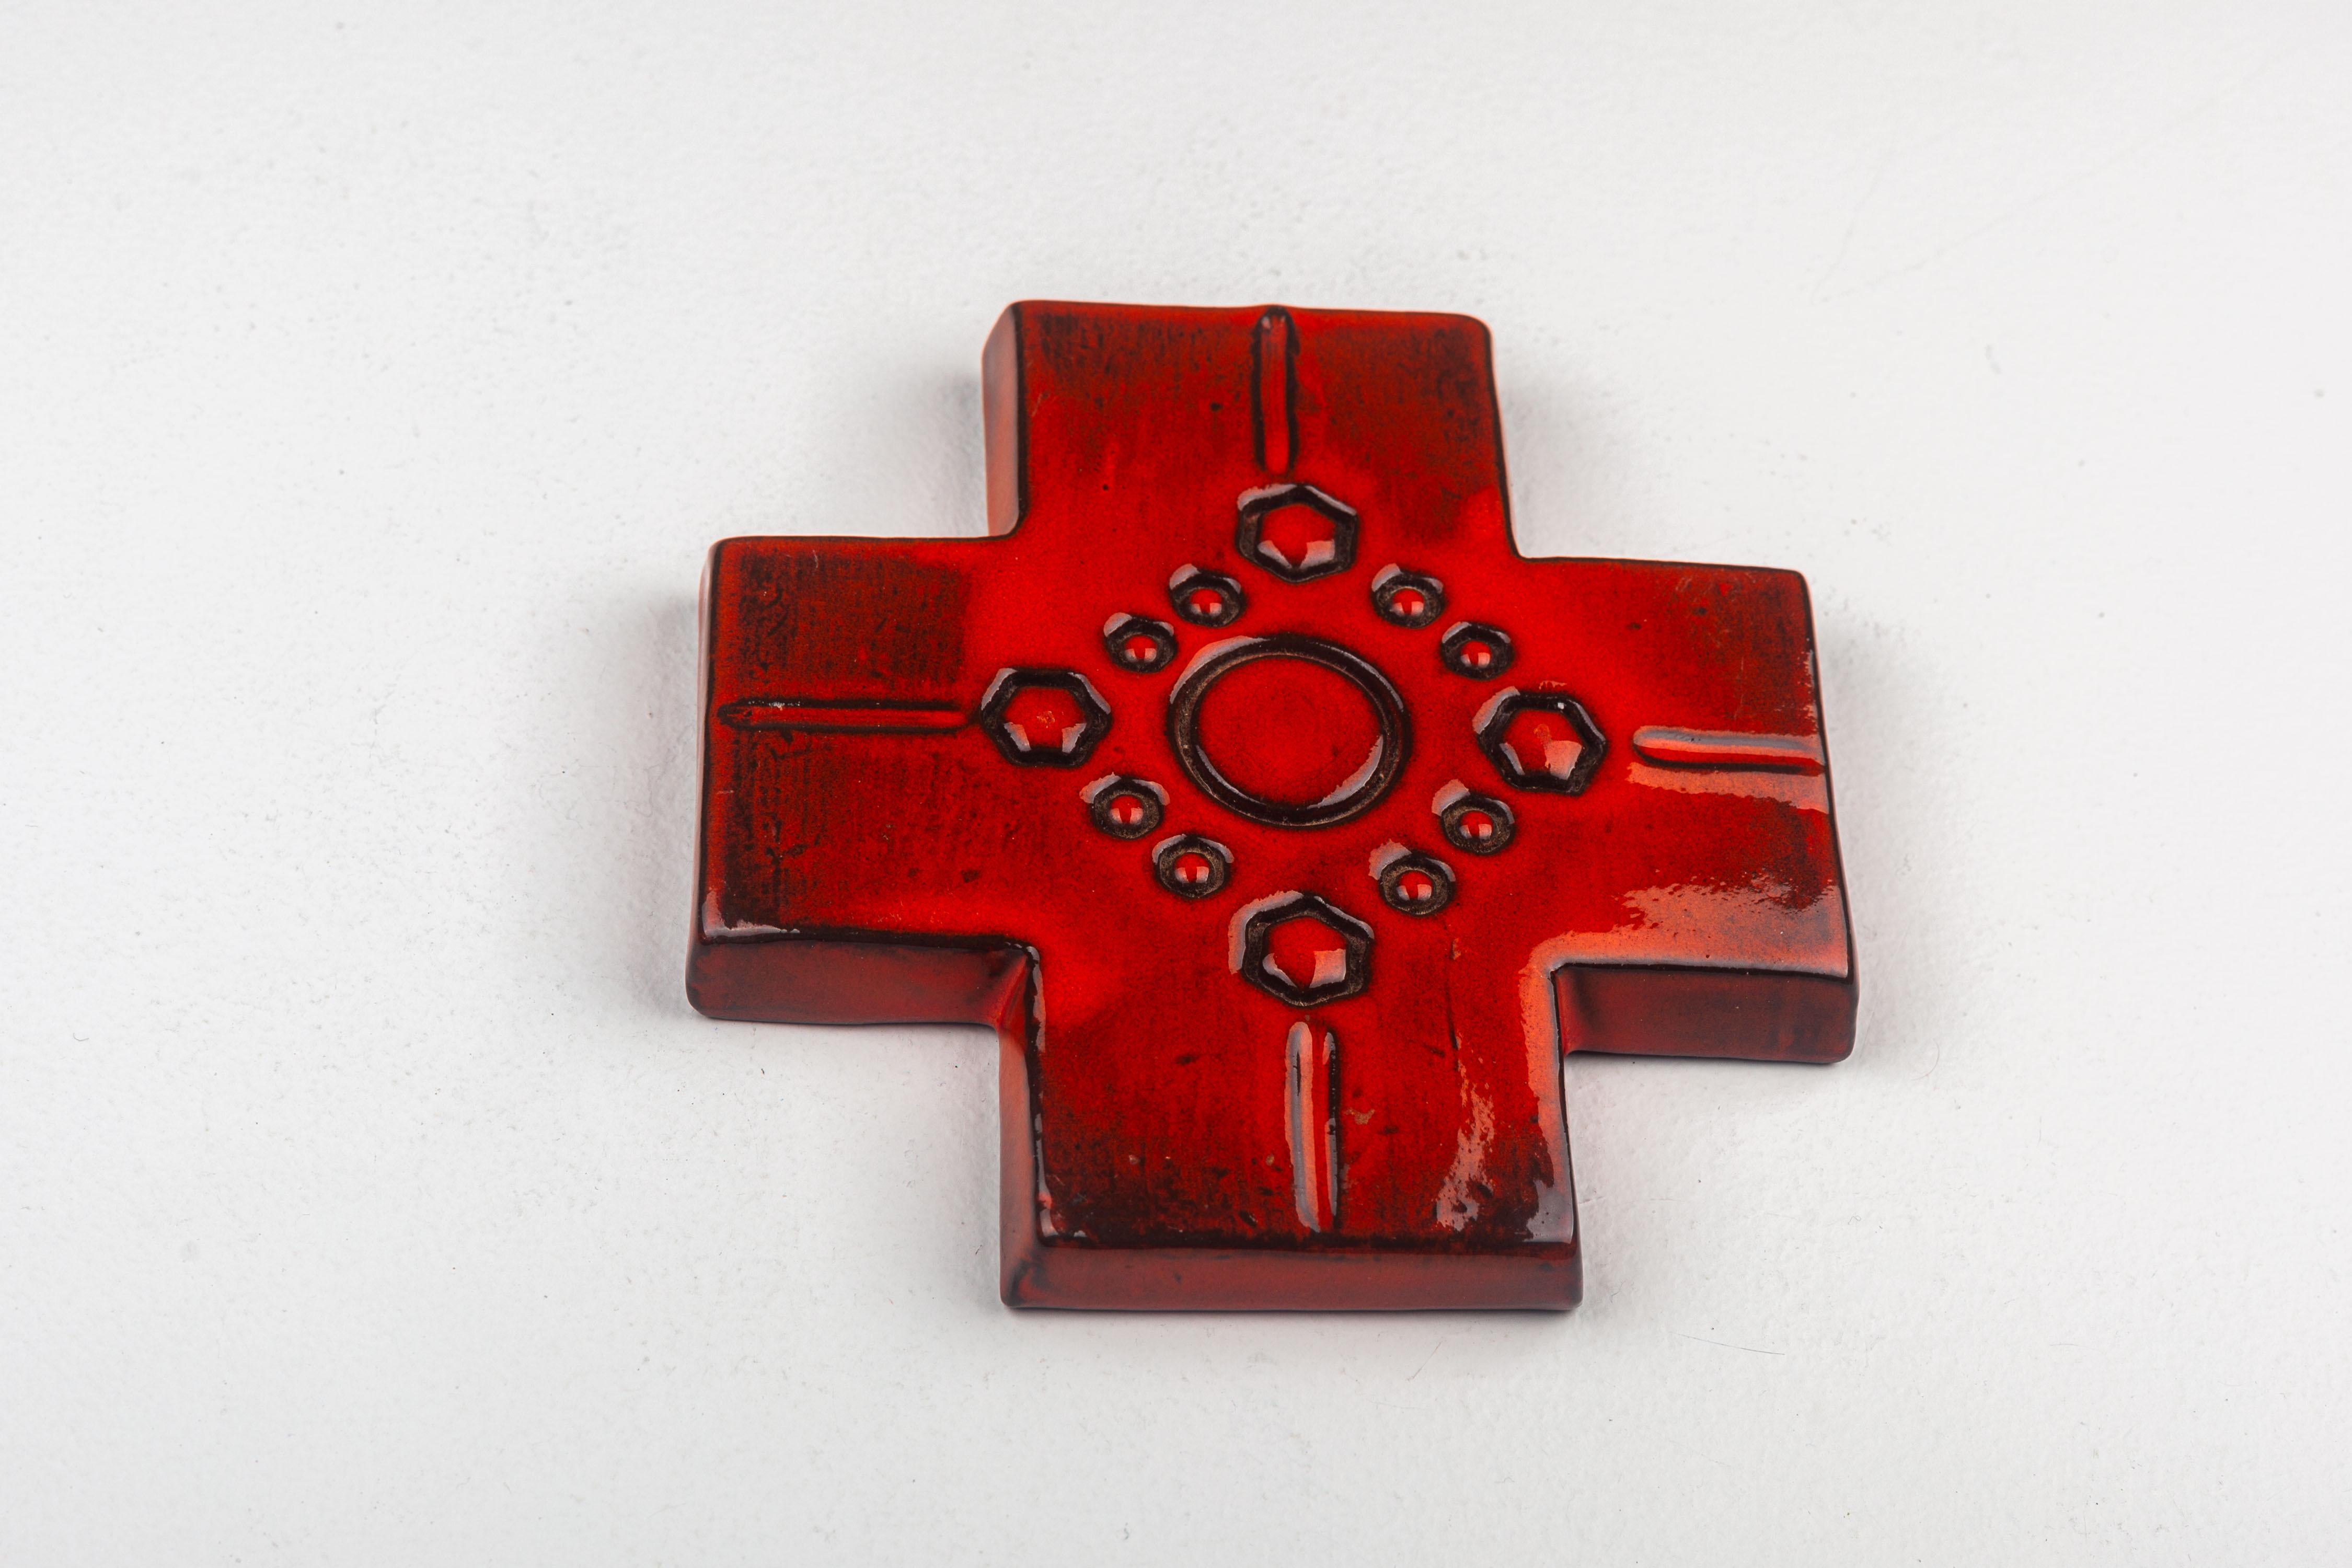 Red-Orange Glossy Ceramic Cross, Symmetrical Design with Circle Embellishments For Sale 2